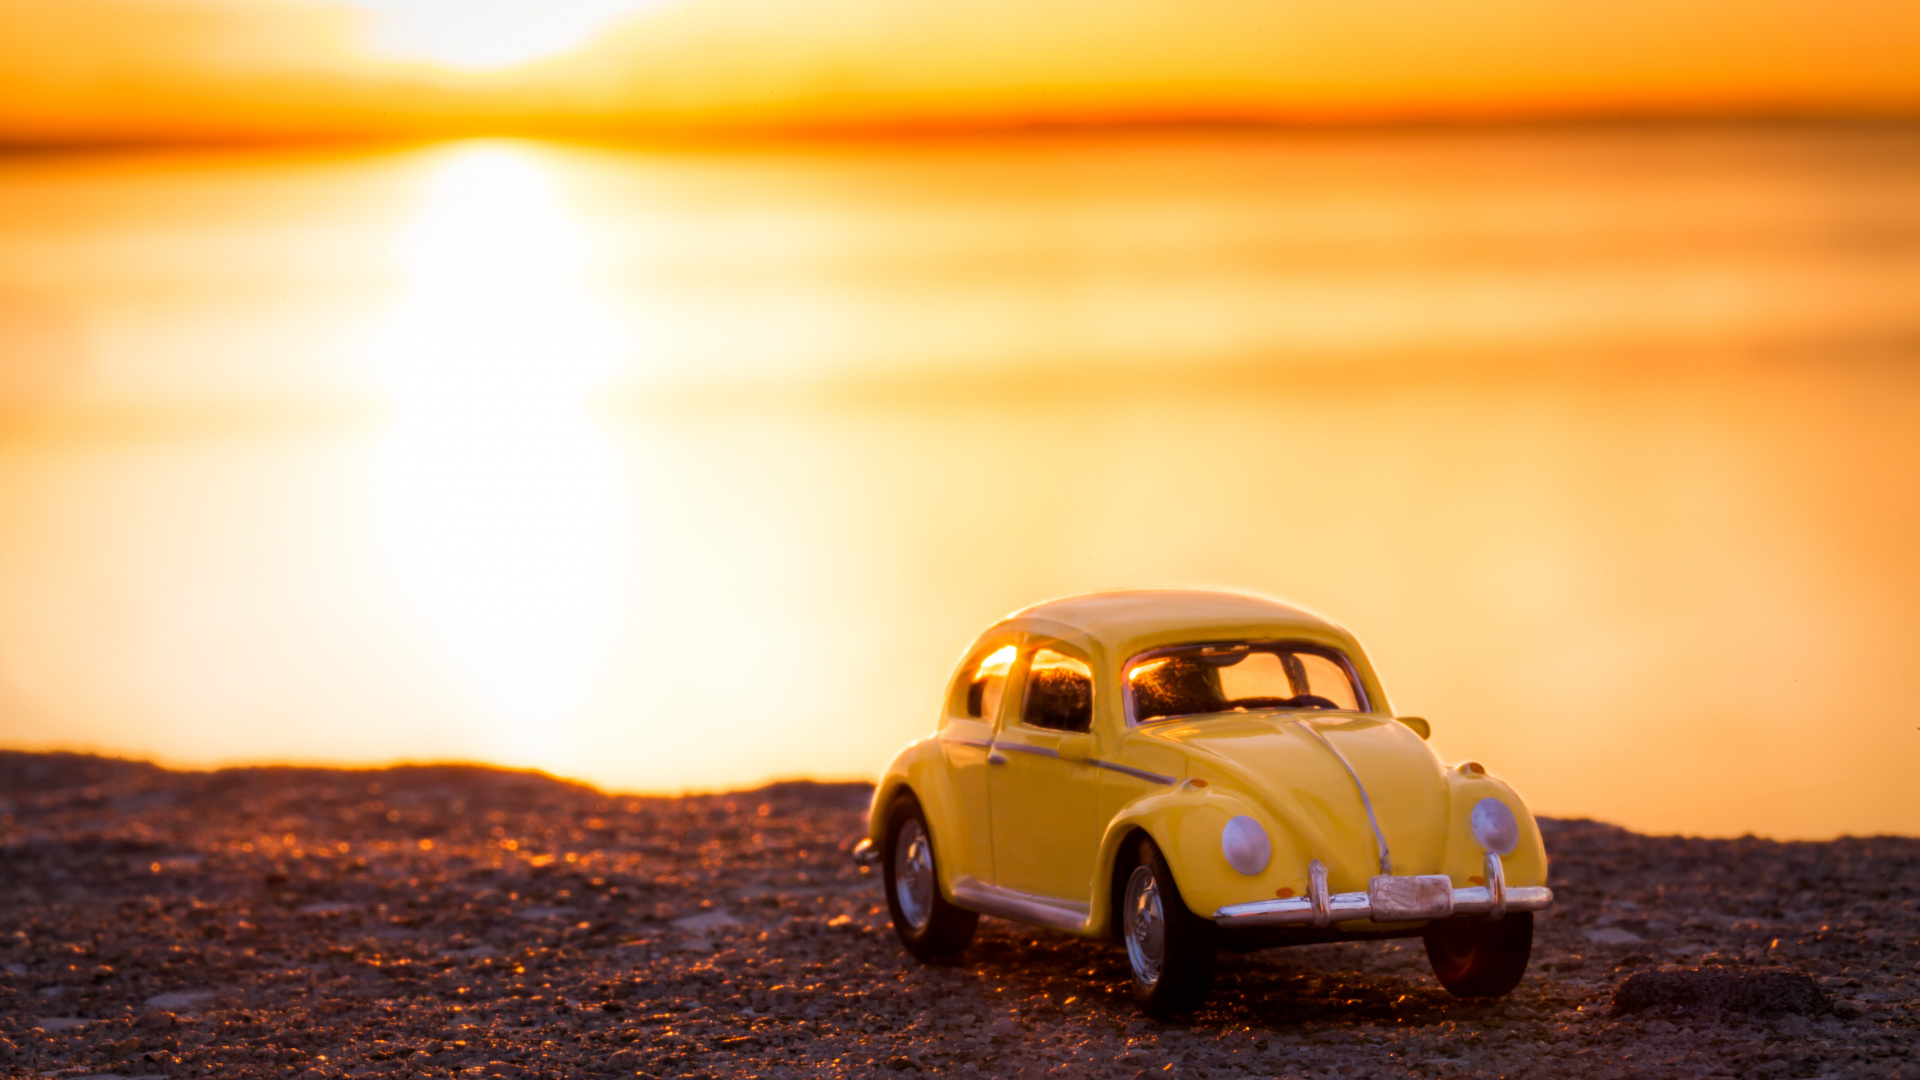 Yellow Volkswagen Beetle on Shore During Sunset. Wallpaper in 1920x1080 Resolution